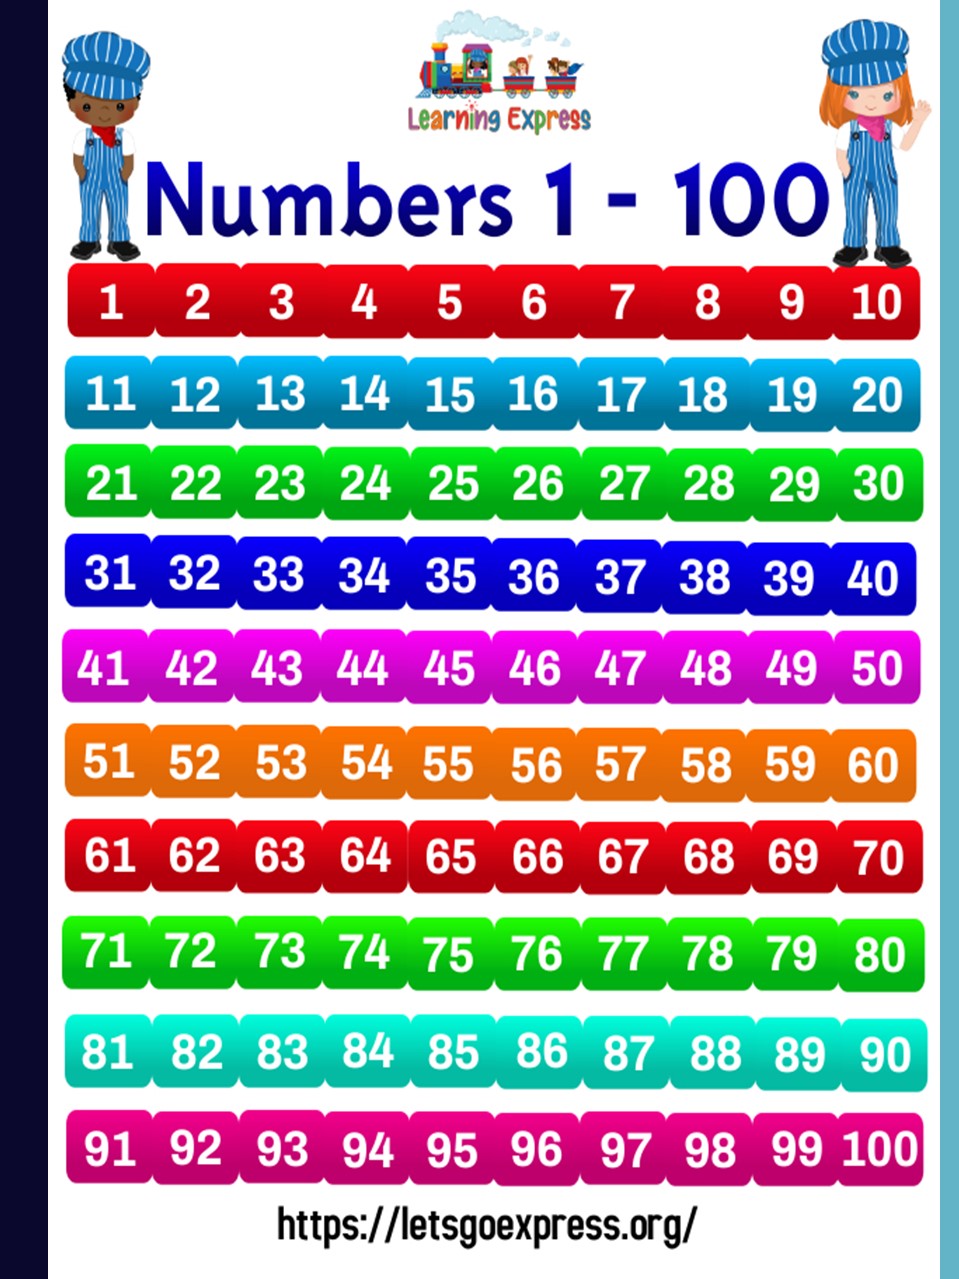 Numbers Poster, 17” x 22” and 11” x 17”, Laminated/ Regular Material